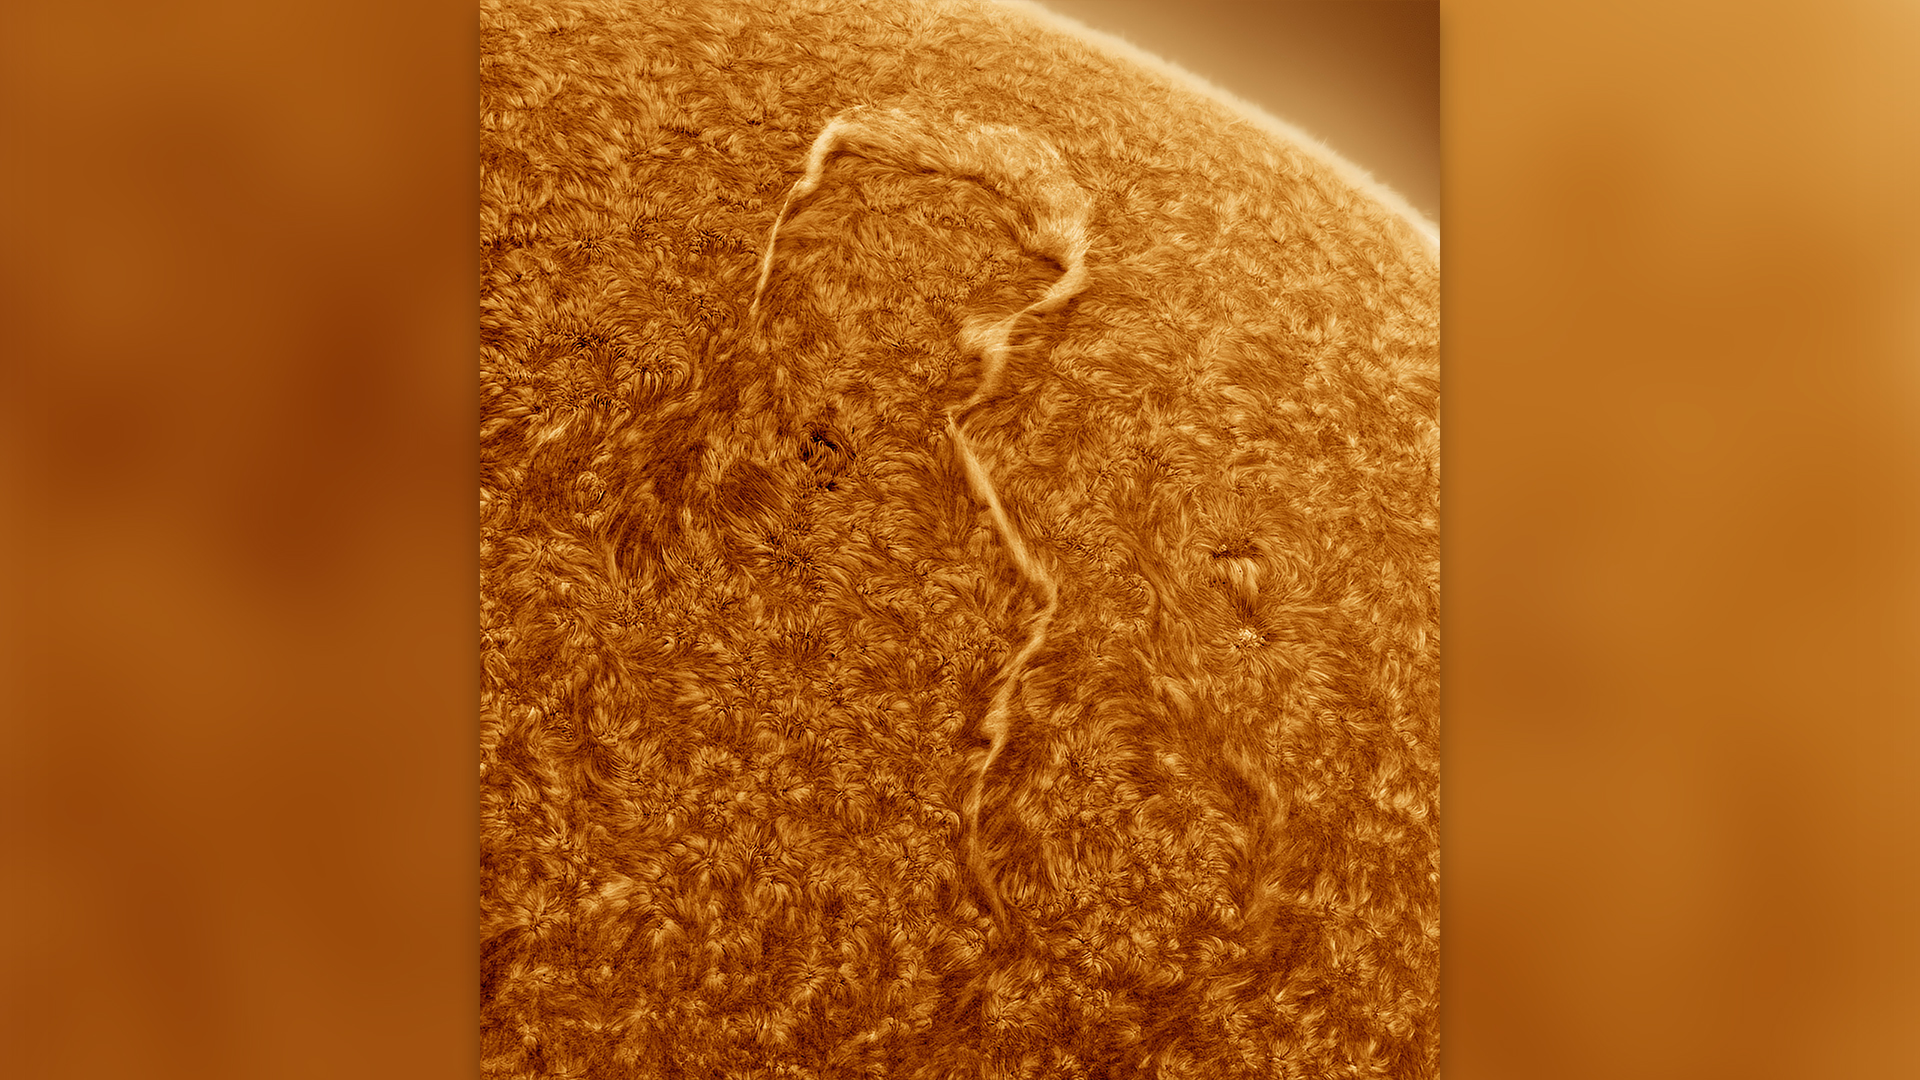 A question mark-shaped solar filament rising from the sun's surface.